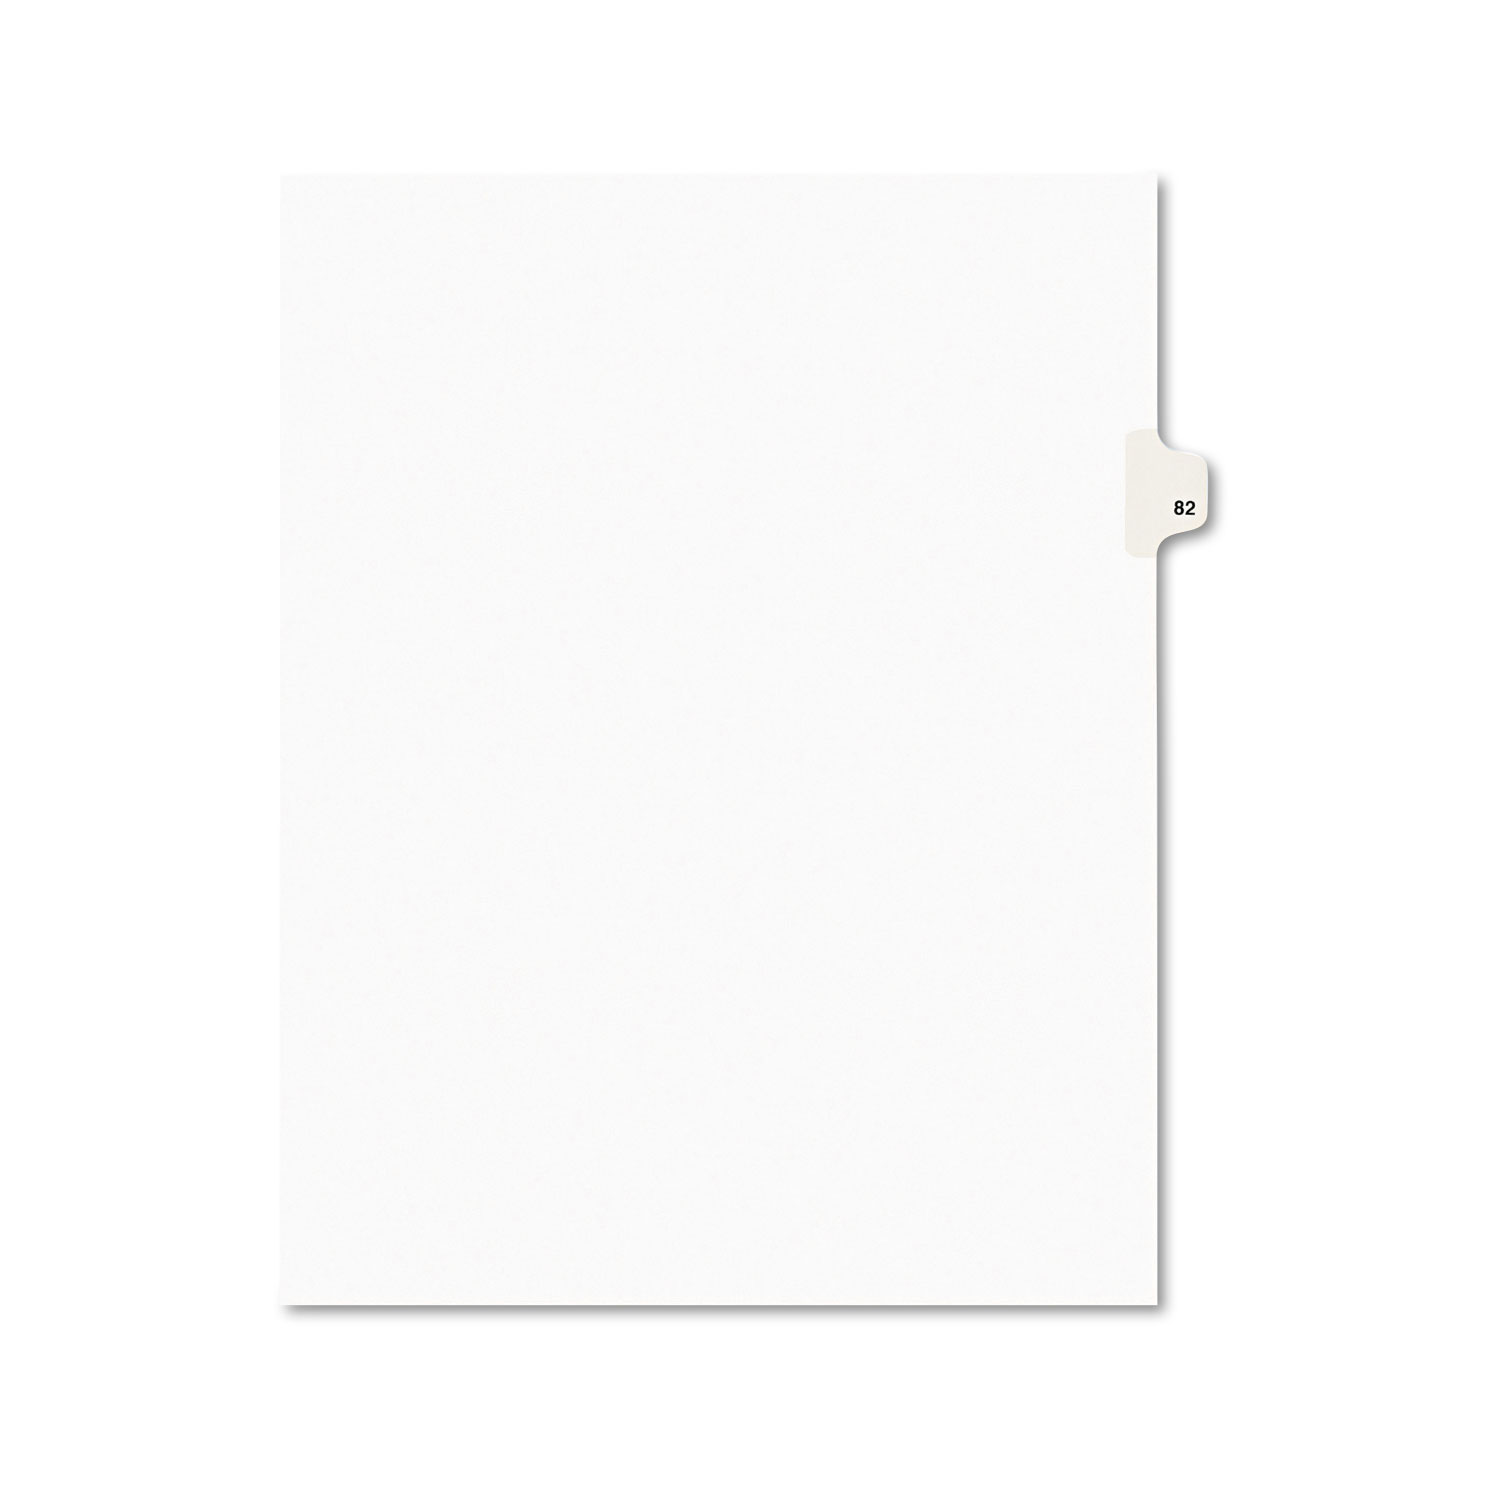  Avery 01082 Preprinted Legal Exhibit Side Tab Index Dividers, Avery Style, 10-Tab, 82, 11 x 8.5, White, 25/Pack (AVE01082) 